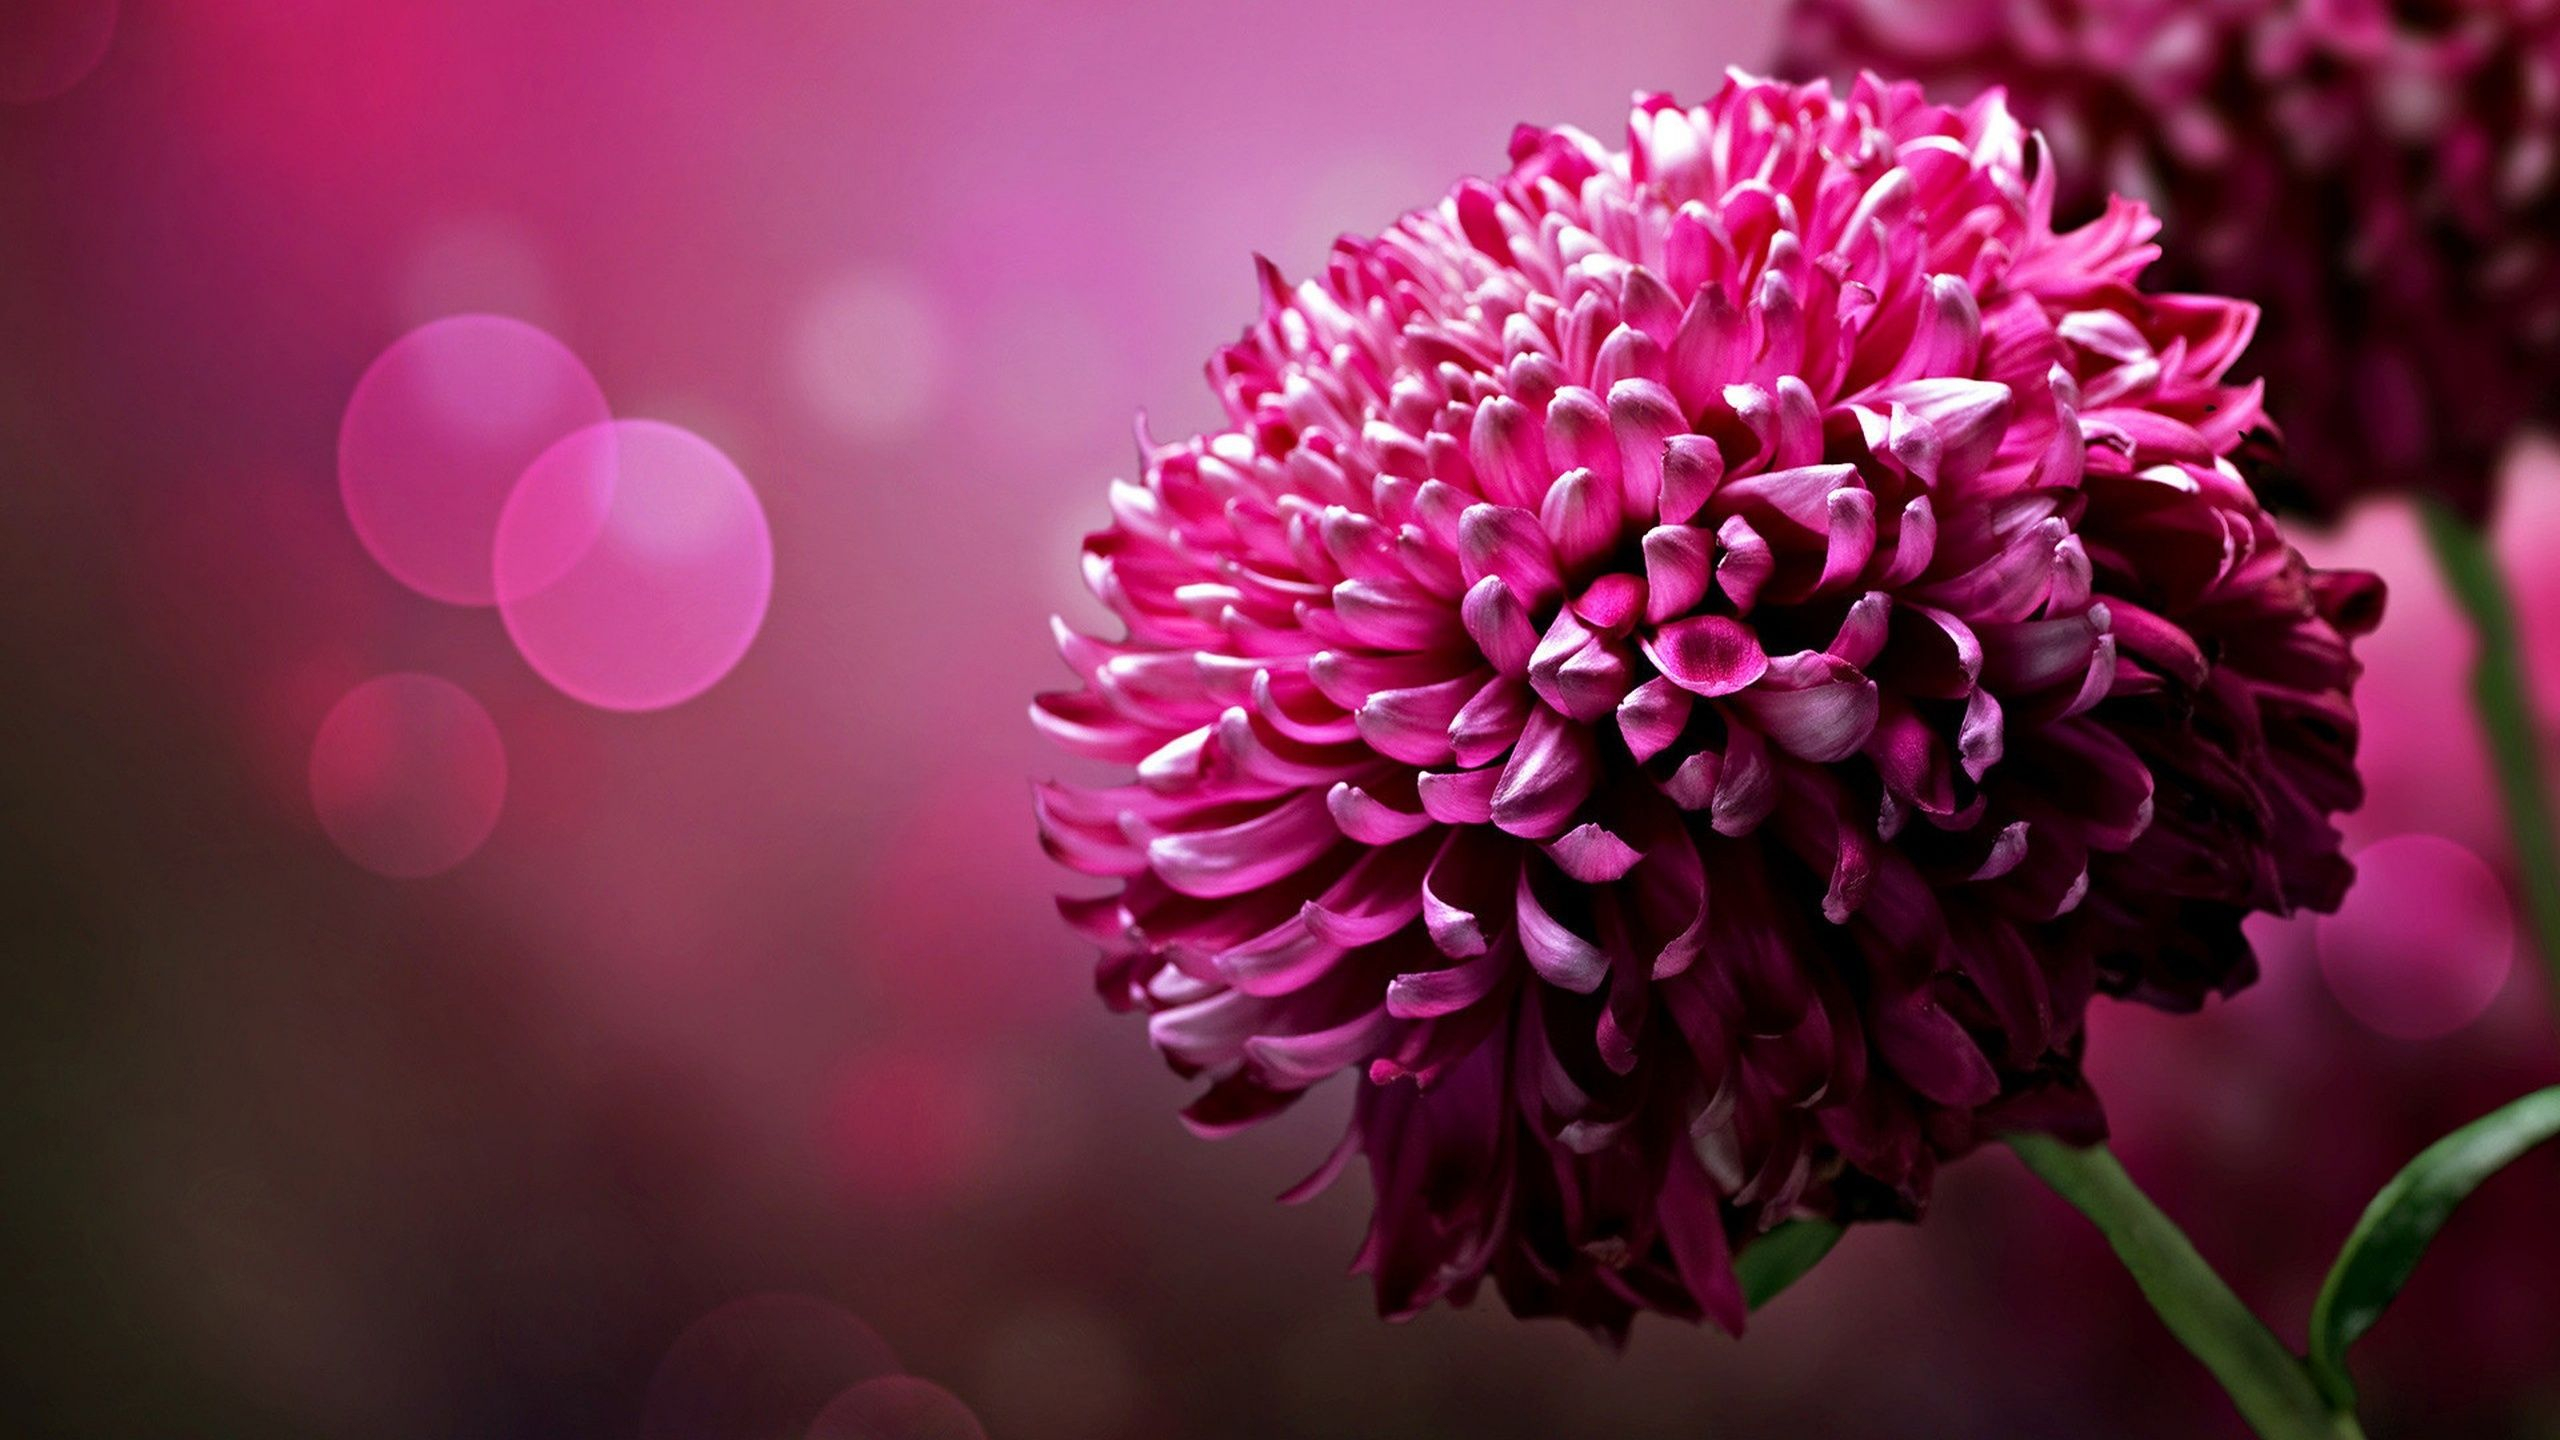 Lovely Image Of Flowers HD Wallpaper. High Definition Wallpaper